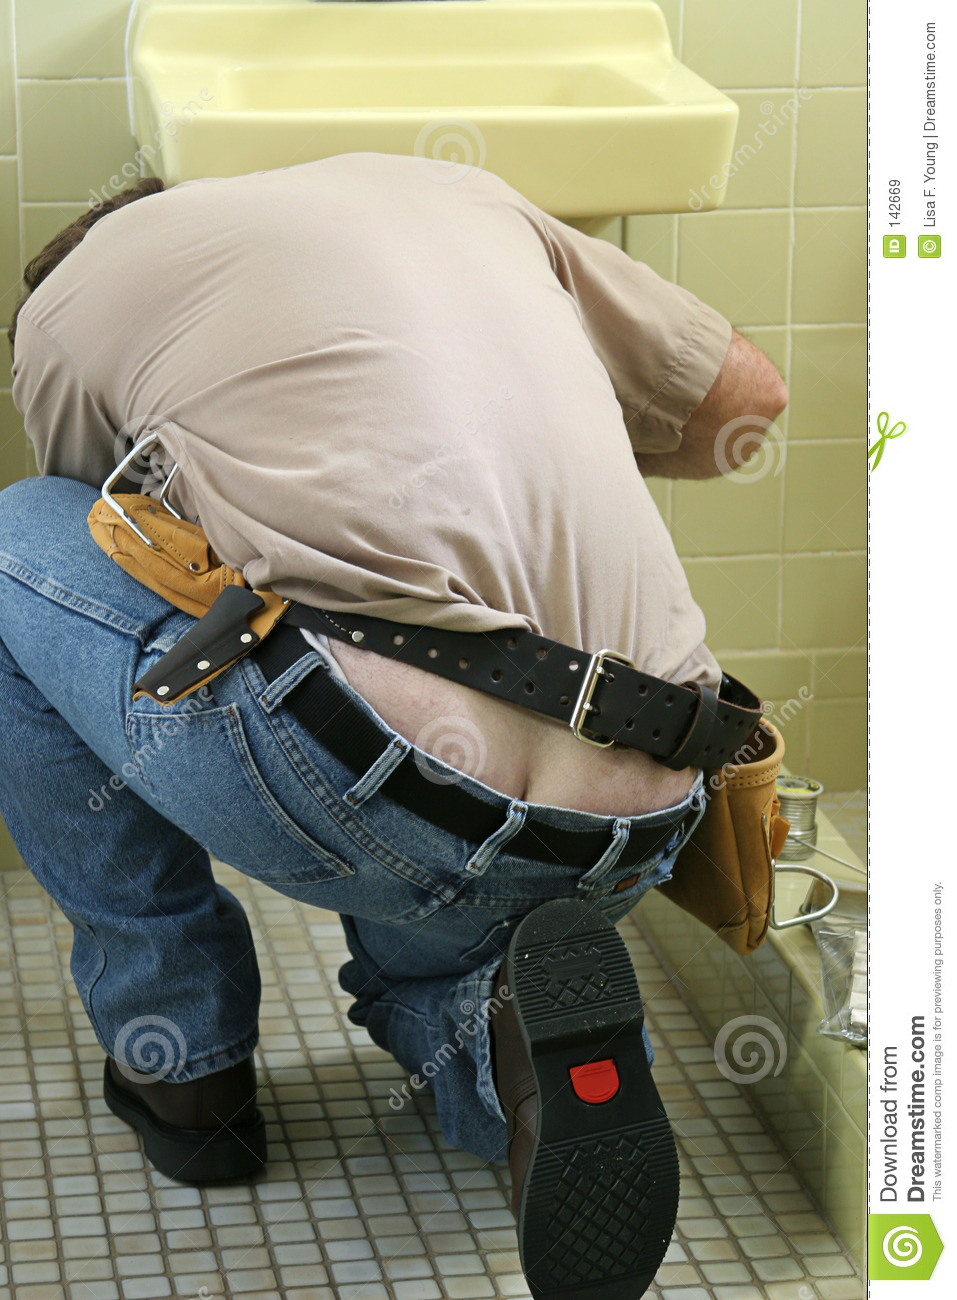 Plumber Bending Over To Fix A Sink  His Butt Crack Is Showing